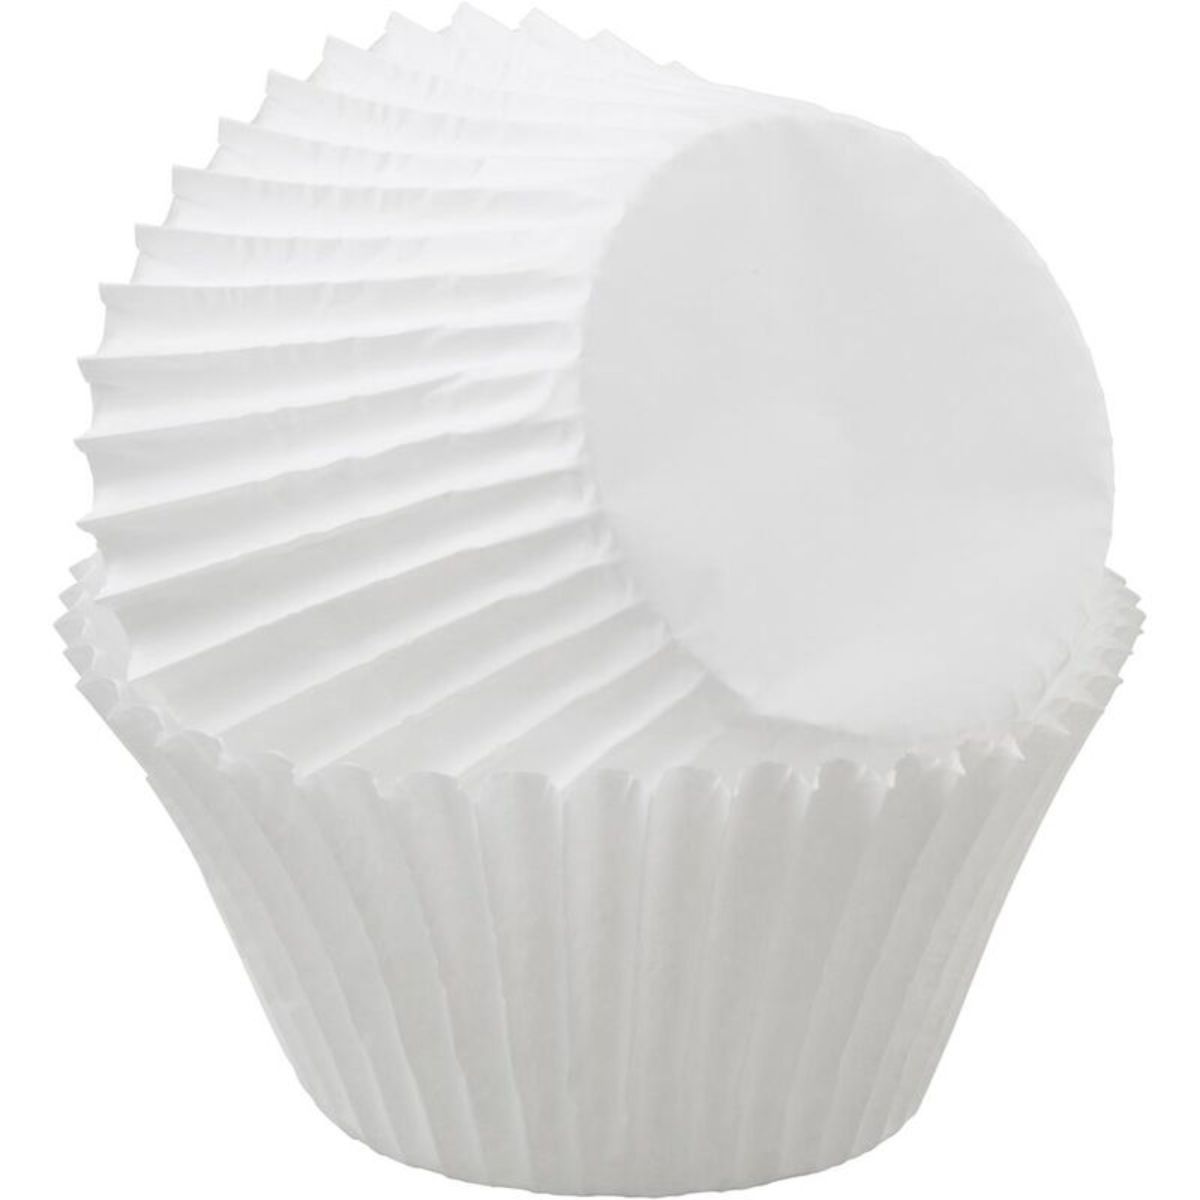 Gold Foil Cupcake Liners, 24-Count - Wilton